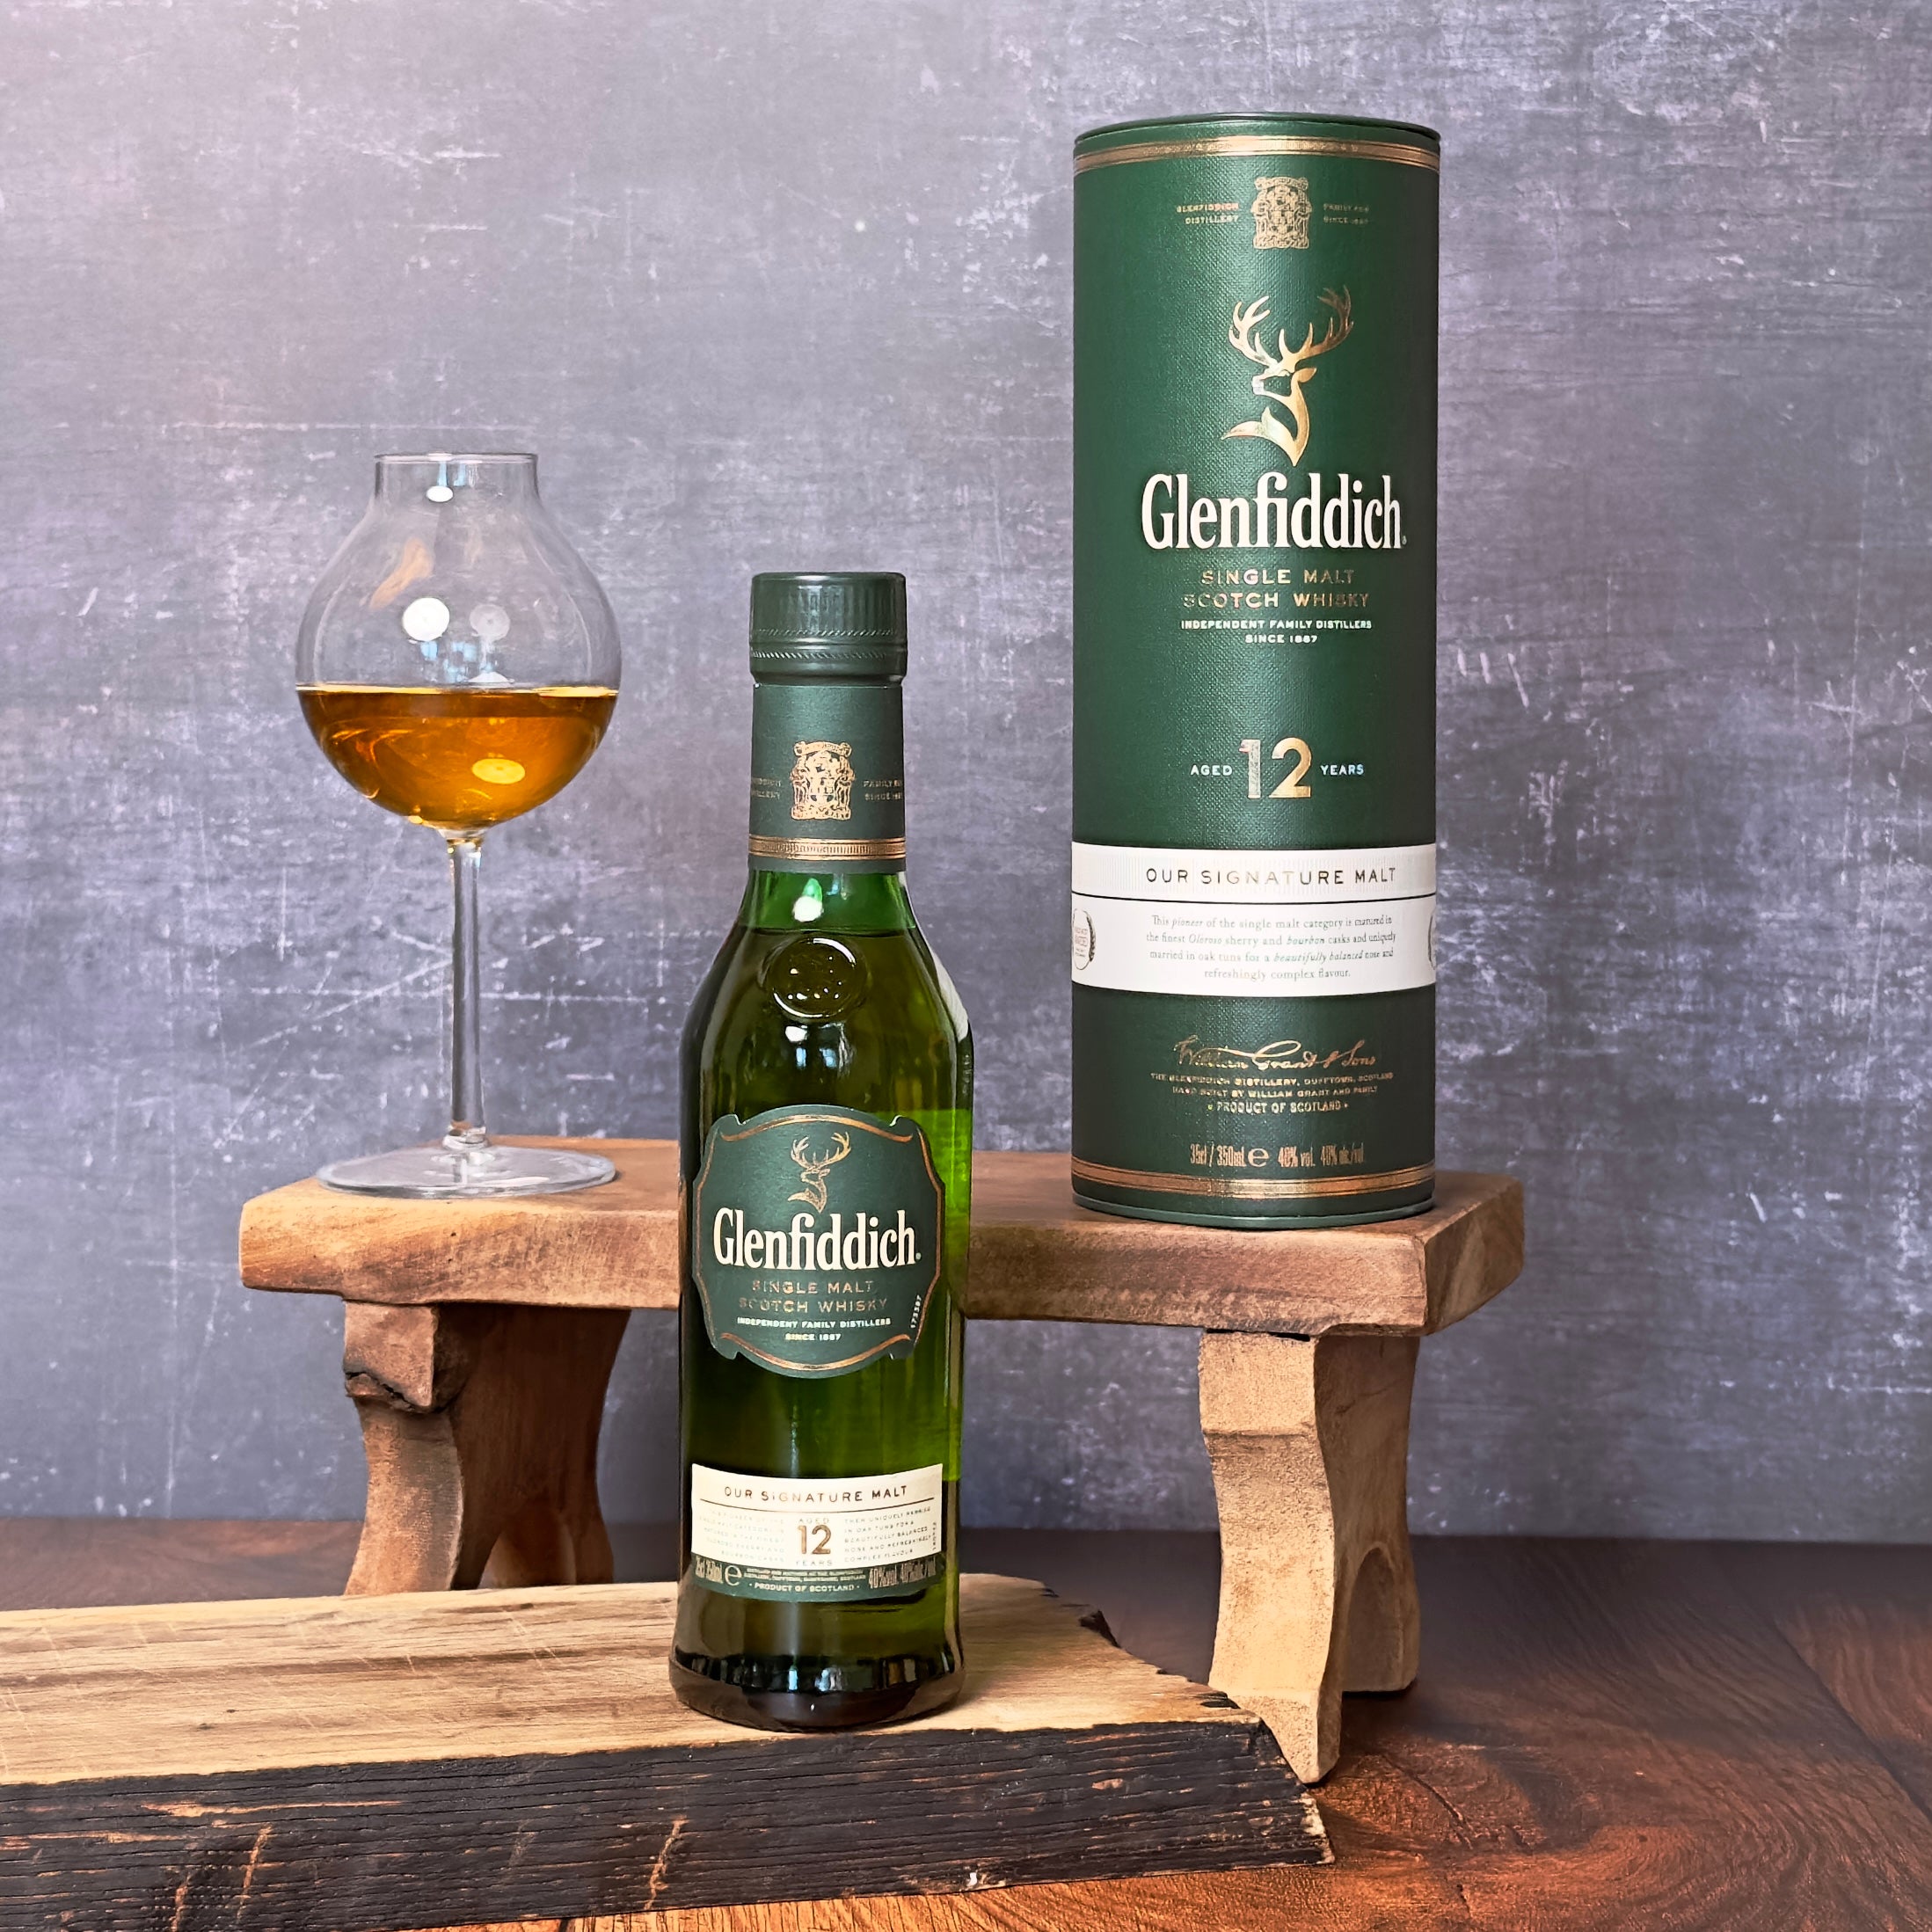 Whisky Favourites Gift Hamper: Glenfiddich and Chocs